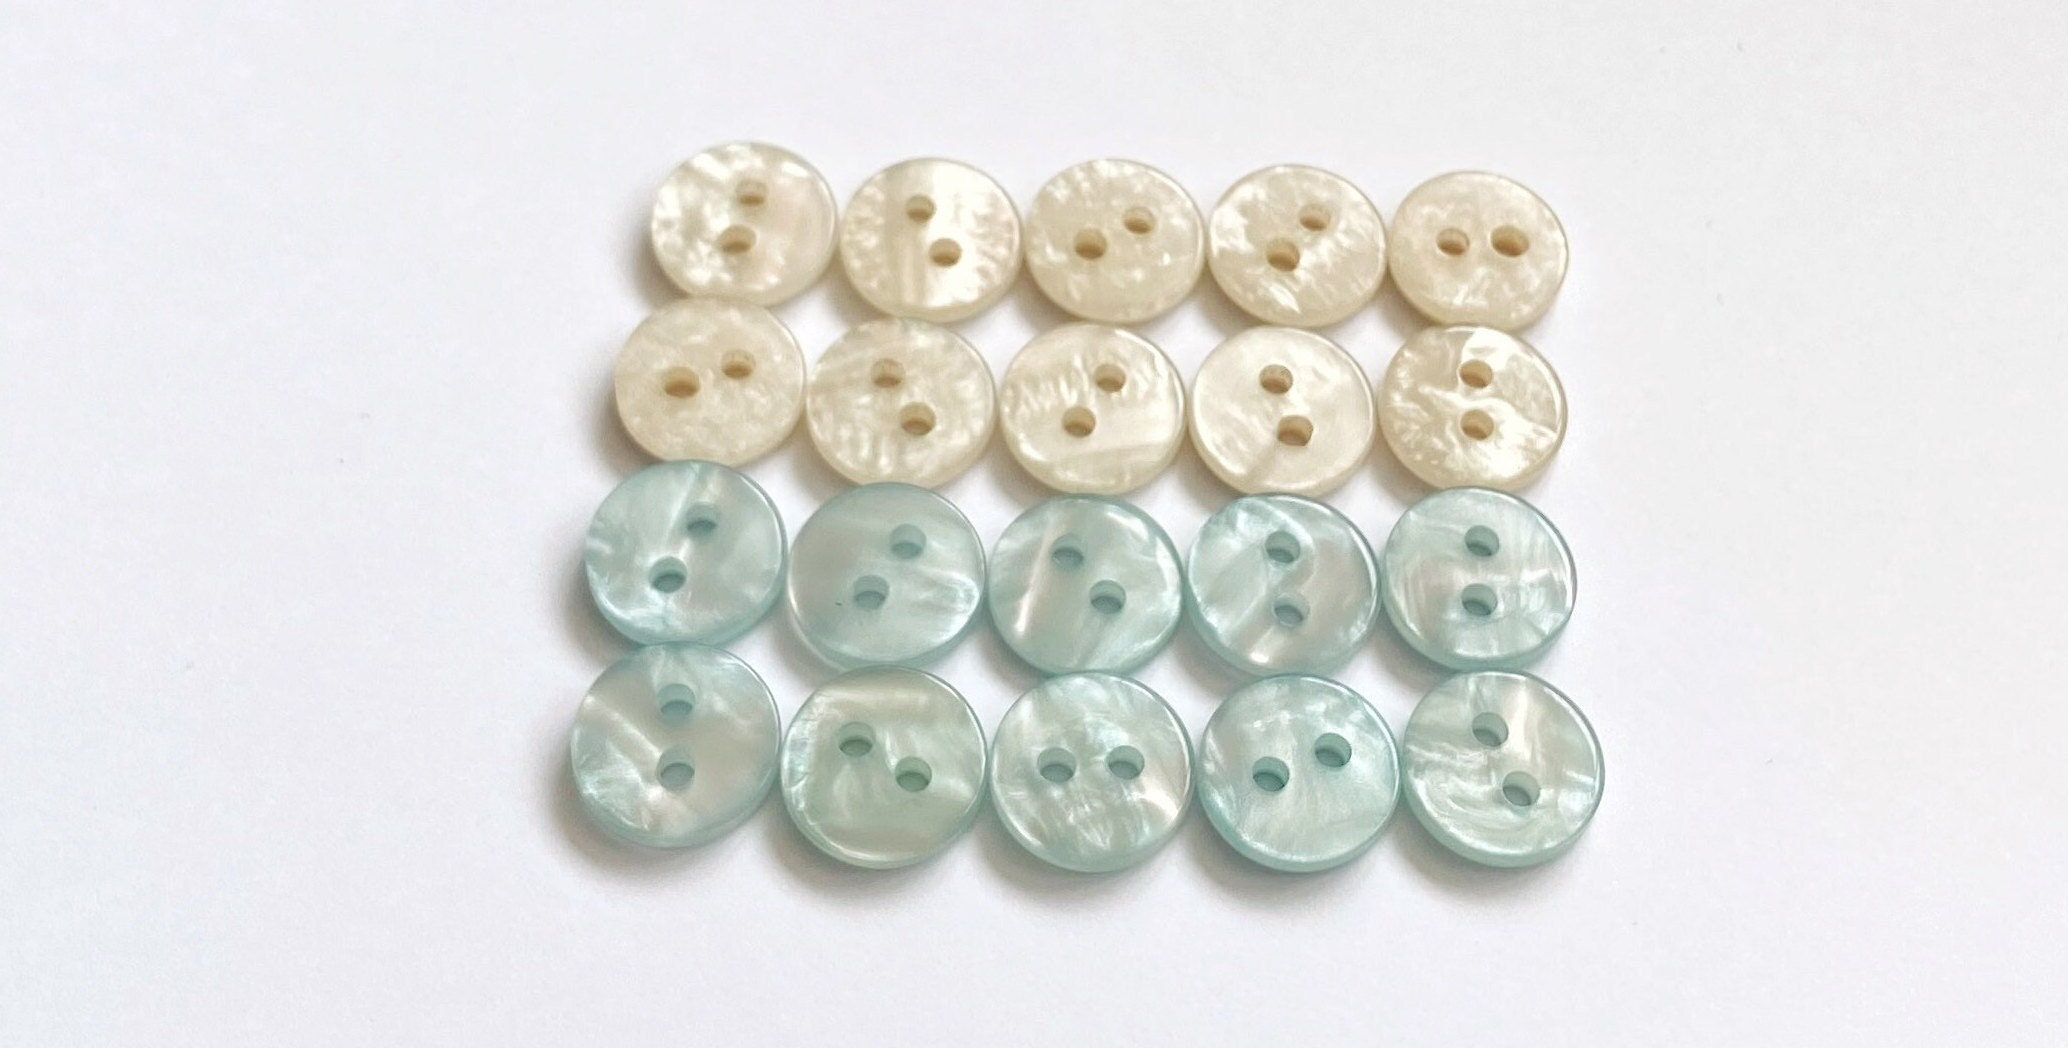 Tiny White Small Buttons, Micro Size 7.5 Mm Craft Buttons, Mini Baby Doll ,  Small Dolly Clothes or Cards 25 per Pack Code B205 